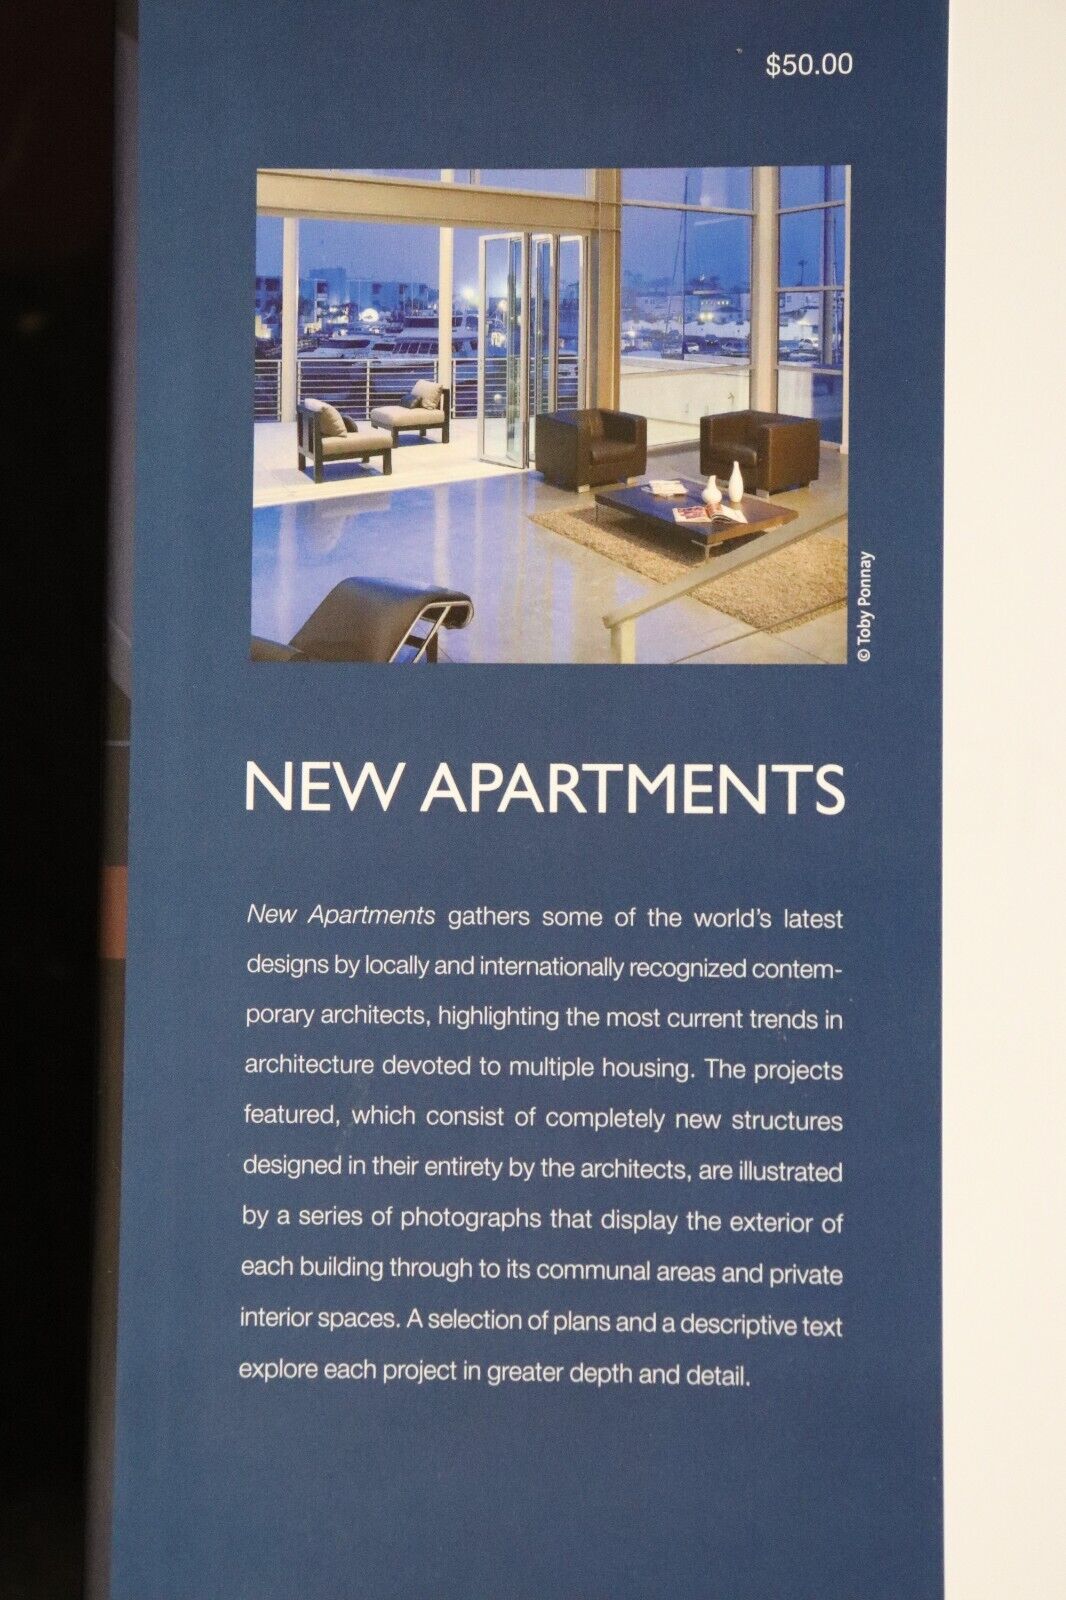 New Apartments by Ana G Canizares - 2005 - Architecture Reference Book